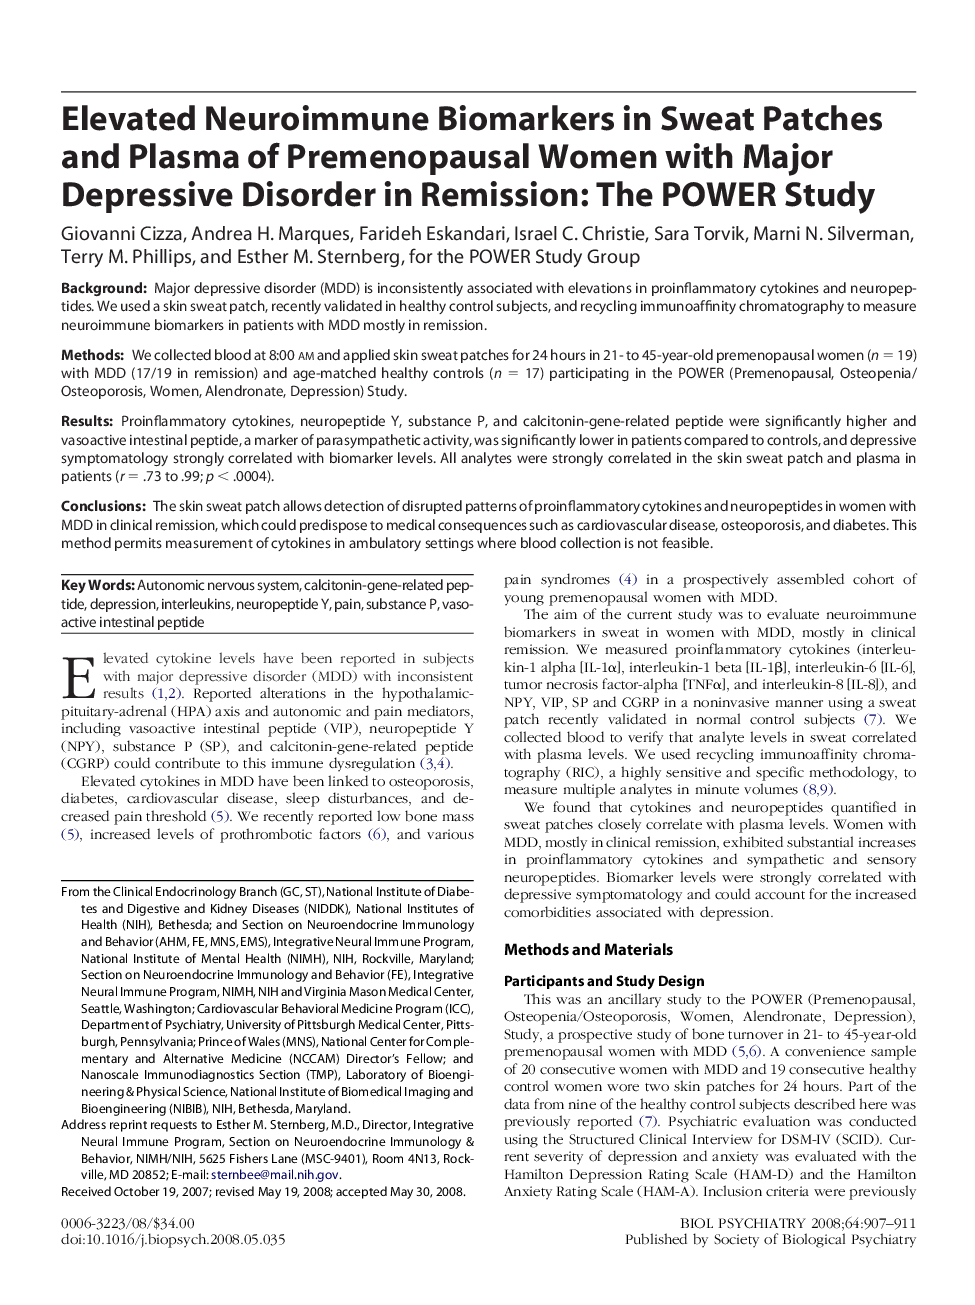 Elevated Neuroimmune Biomarkers in Sweat Patches and Plasma of Premenopausal Women with Major Depressive Disorder in Remission: The POWER Study